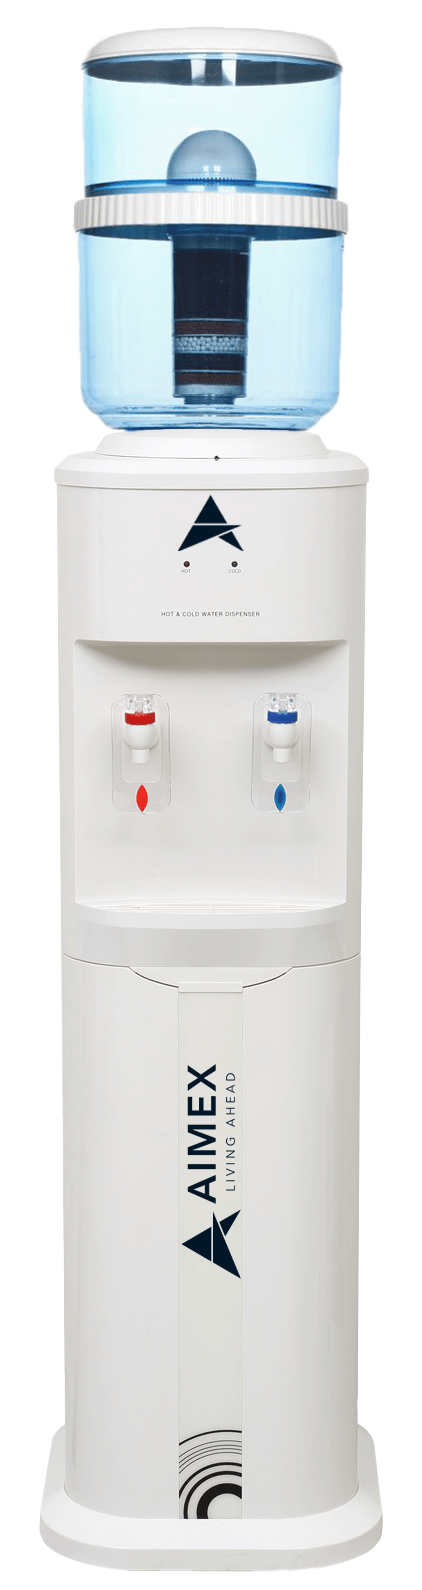 White Free Standing Hot And Cold-Water Dispenser With Filter Bottle